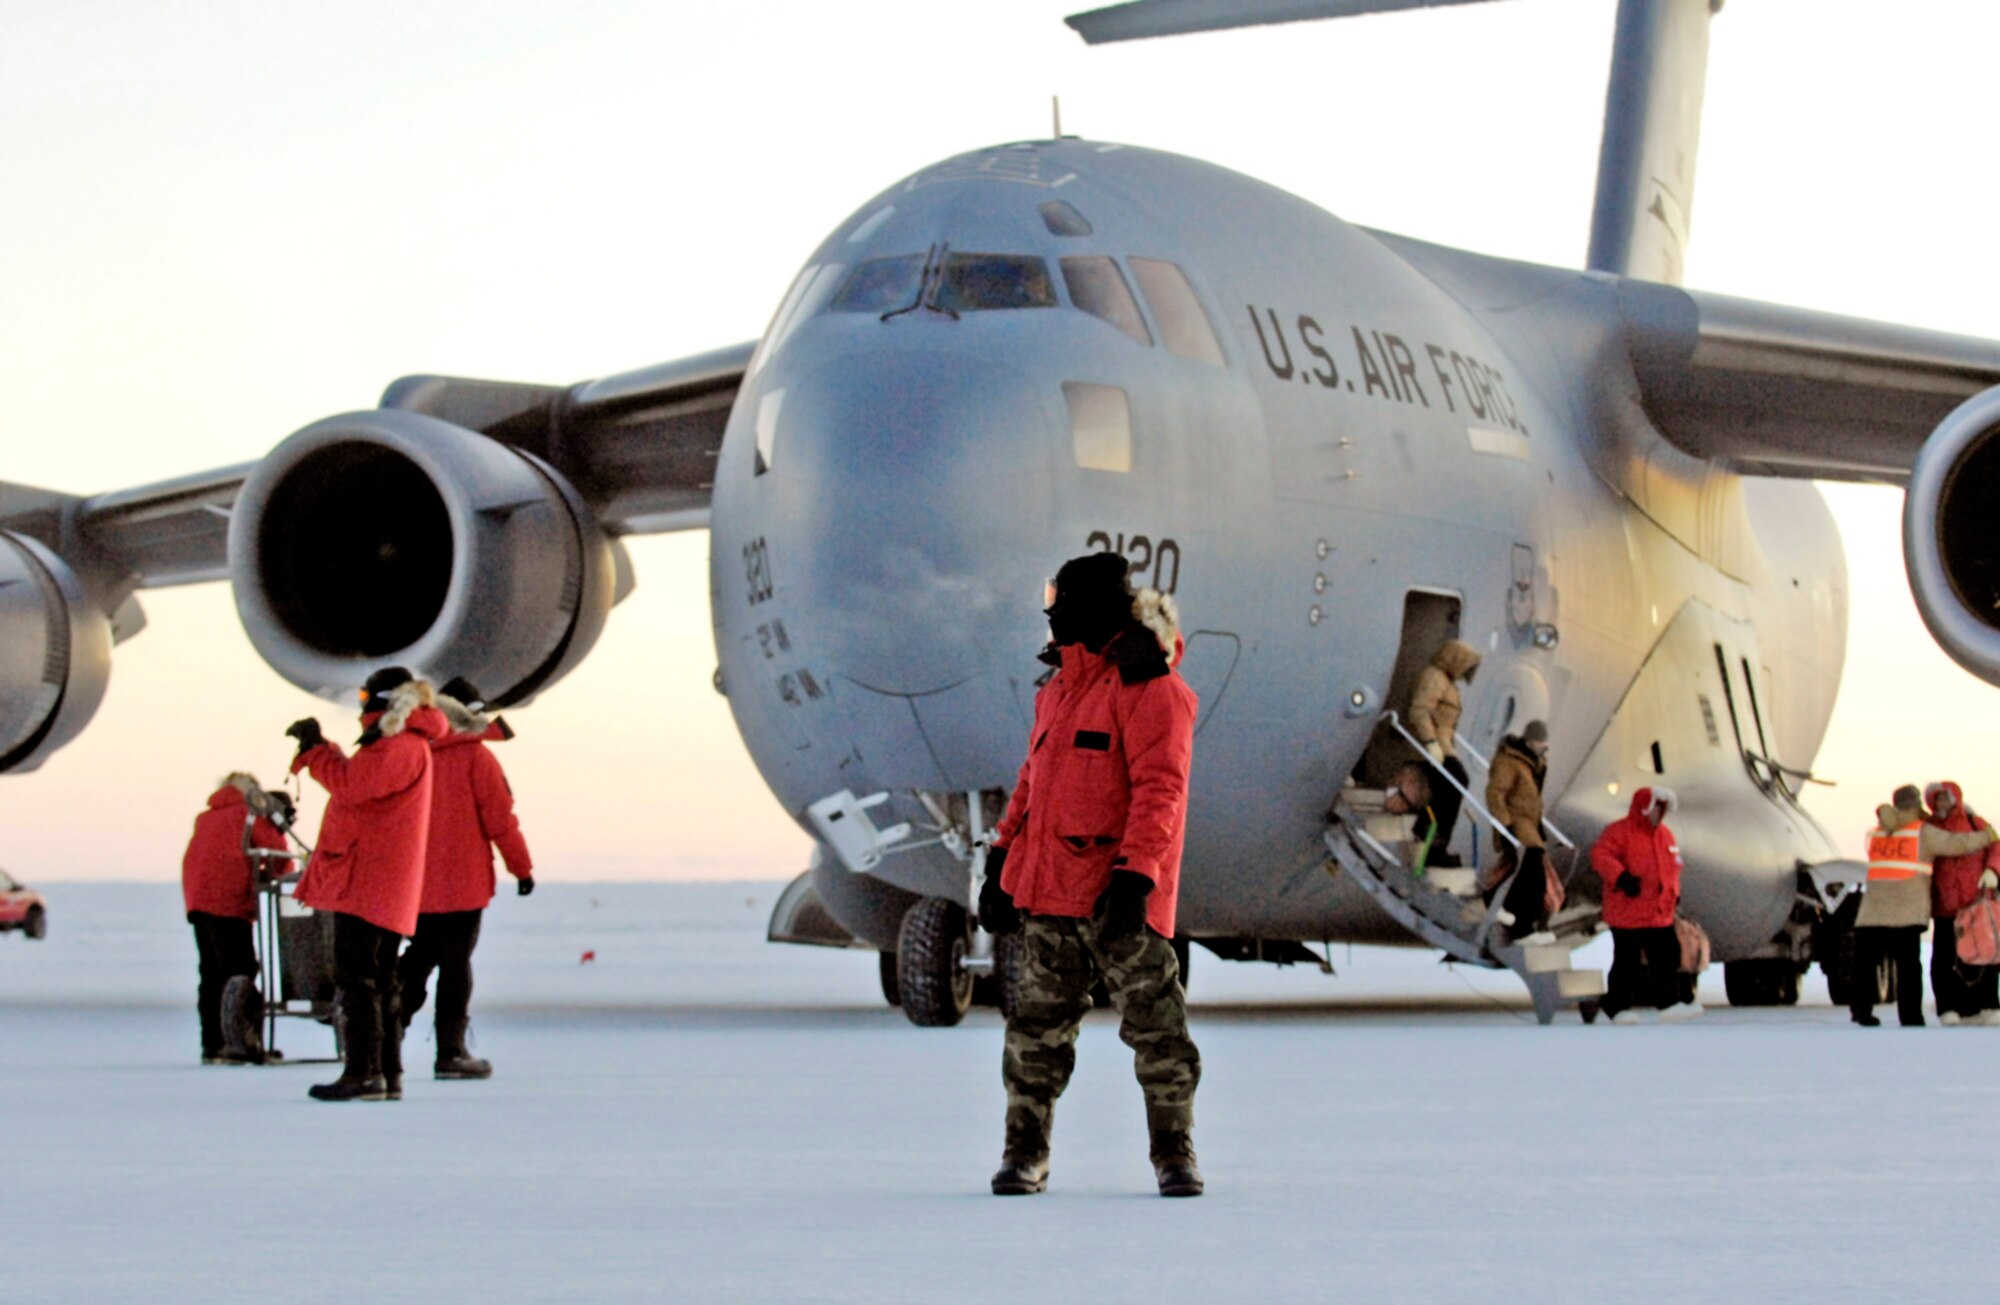 A maintainer looks as National Science Foundation Members get off a C-17 Globemaster III during the Operation Deep Freeze winter fly-in around the Pegasus Runway Aug. 20 in Antarctica. A C-17 and 31 Airmen from McChord Air Force Base, Wash., began the annual winter fly-in augmentation of scientists, support personnel, food and equipment for the U.S. Antarctic Program at McMurdo Station. WinFly is the opening of the first flights to McMurdo Station, which closed for the austral winter in February. (U.S. Air Force photo/Tech. Sgt. Shane A. Cuomo) 